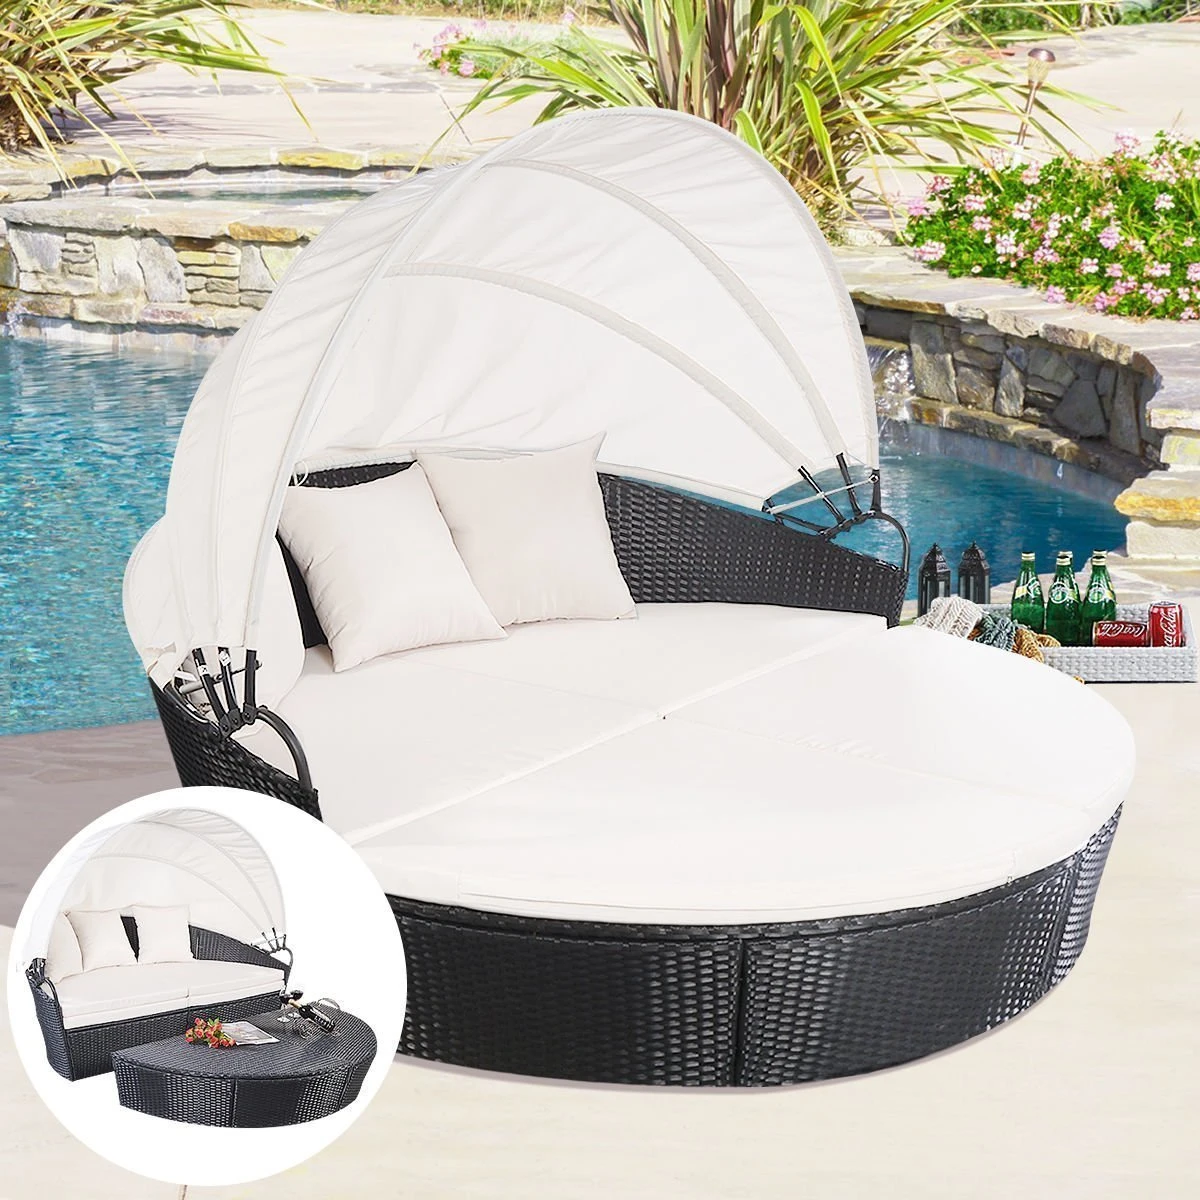 Outdoor Furniture Wicker rattan with Retractable Canopy Clamshell Seating sofa